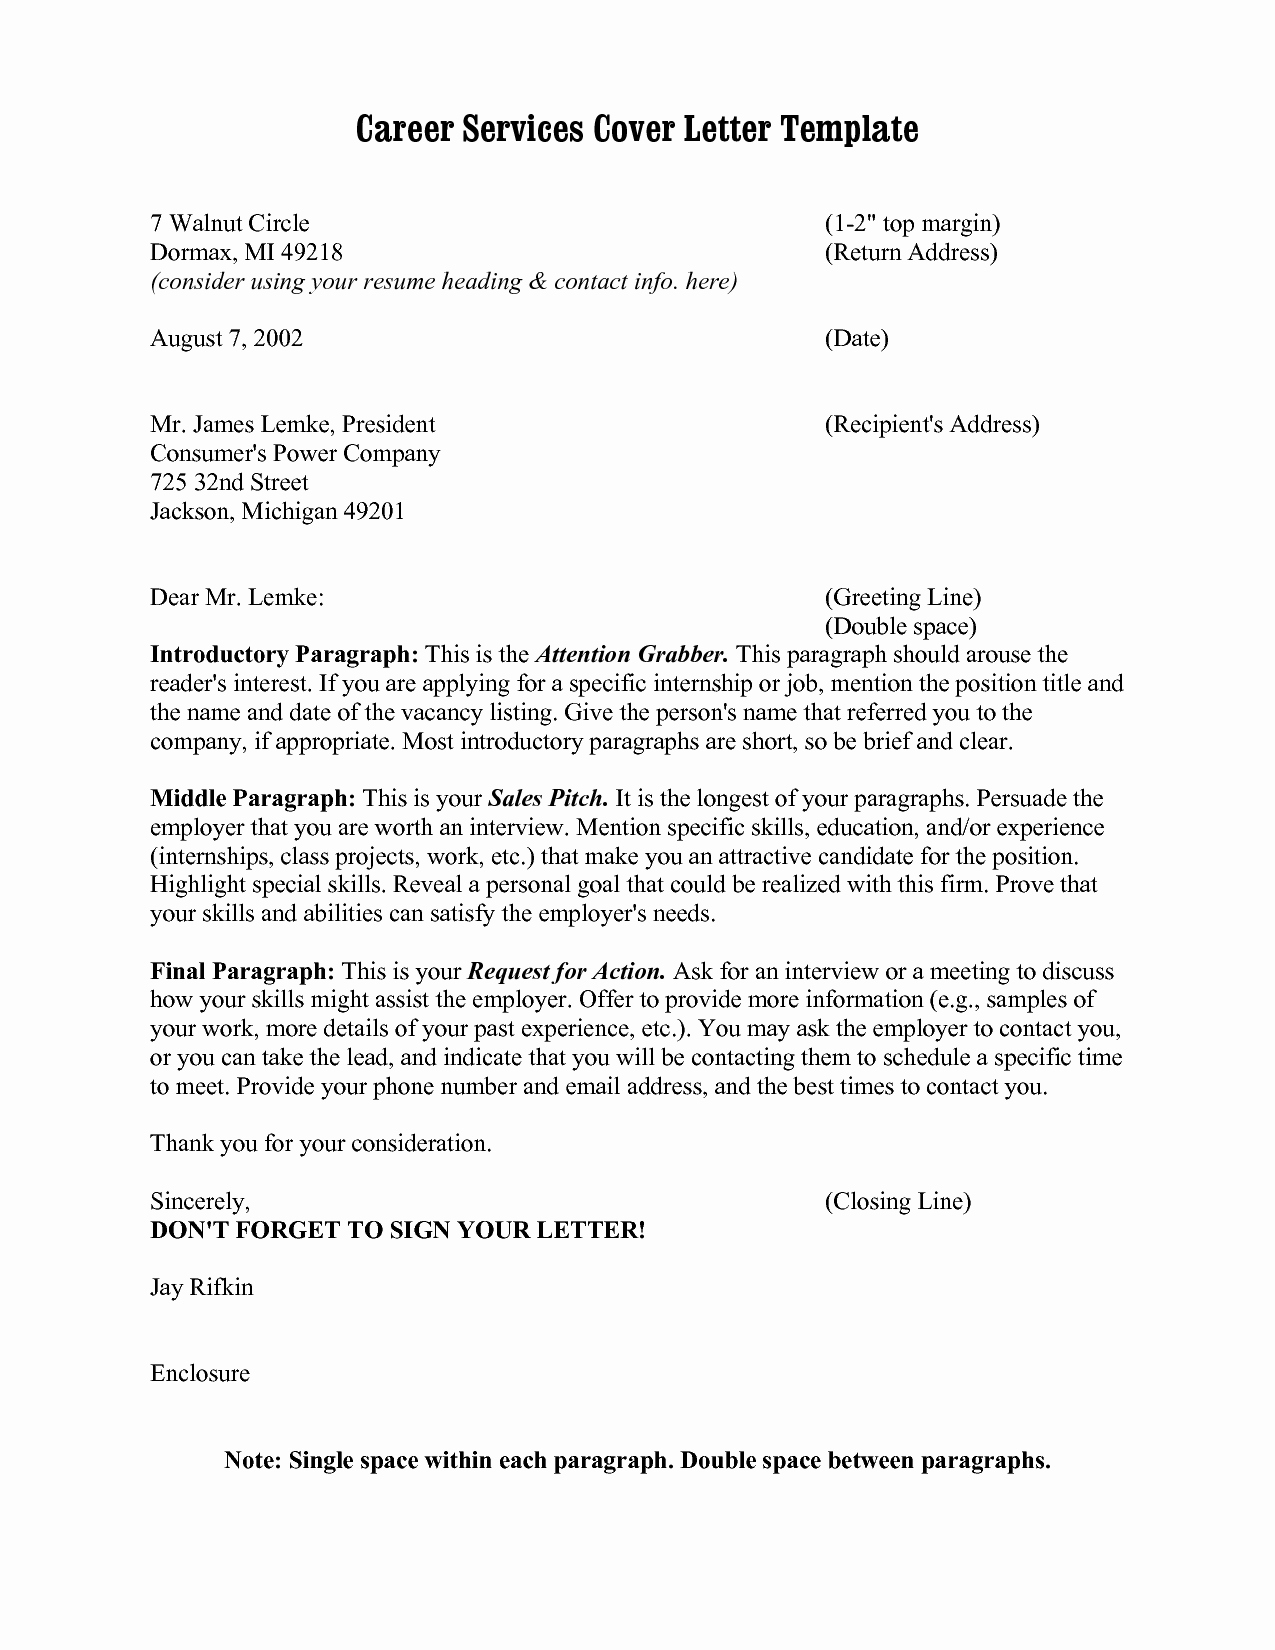 Jimmy Sweeney Cover Letter Template - Jimmy Sweeney Cover Luxury Jimmy Sweeney Cover Letters Cover